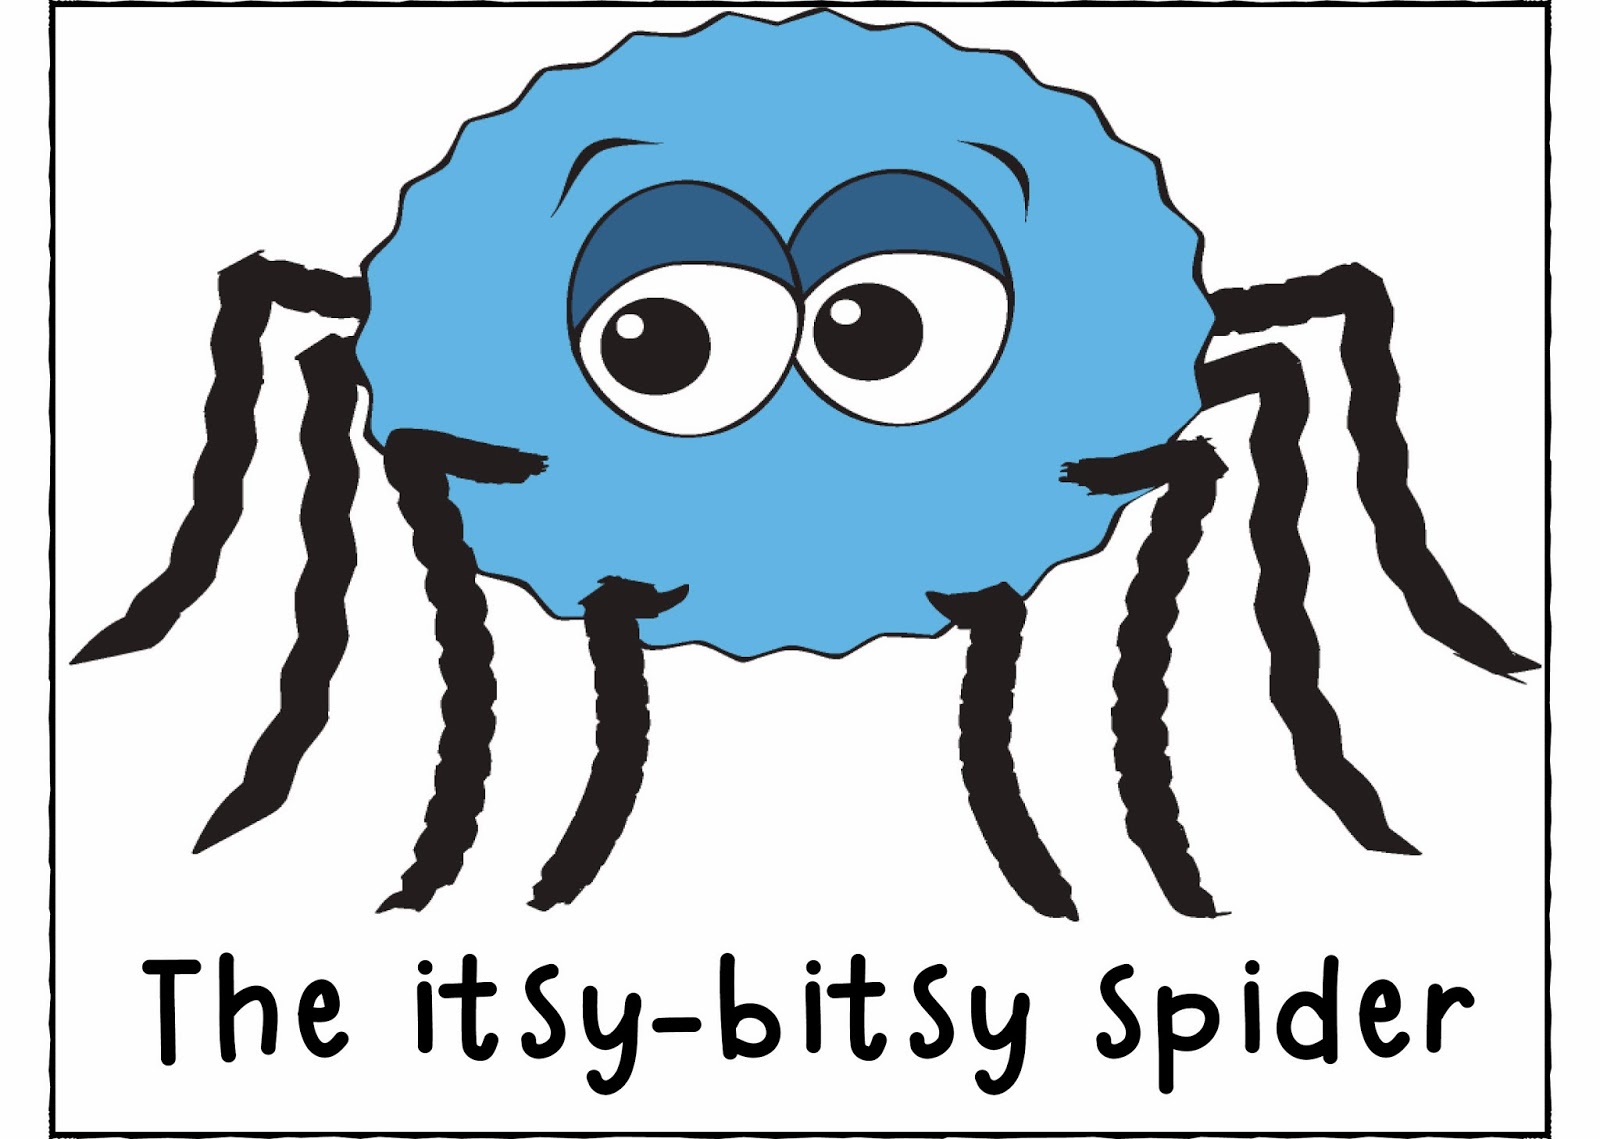 To download my posters about Itsy-Bitsy Spider, click here .